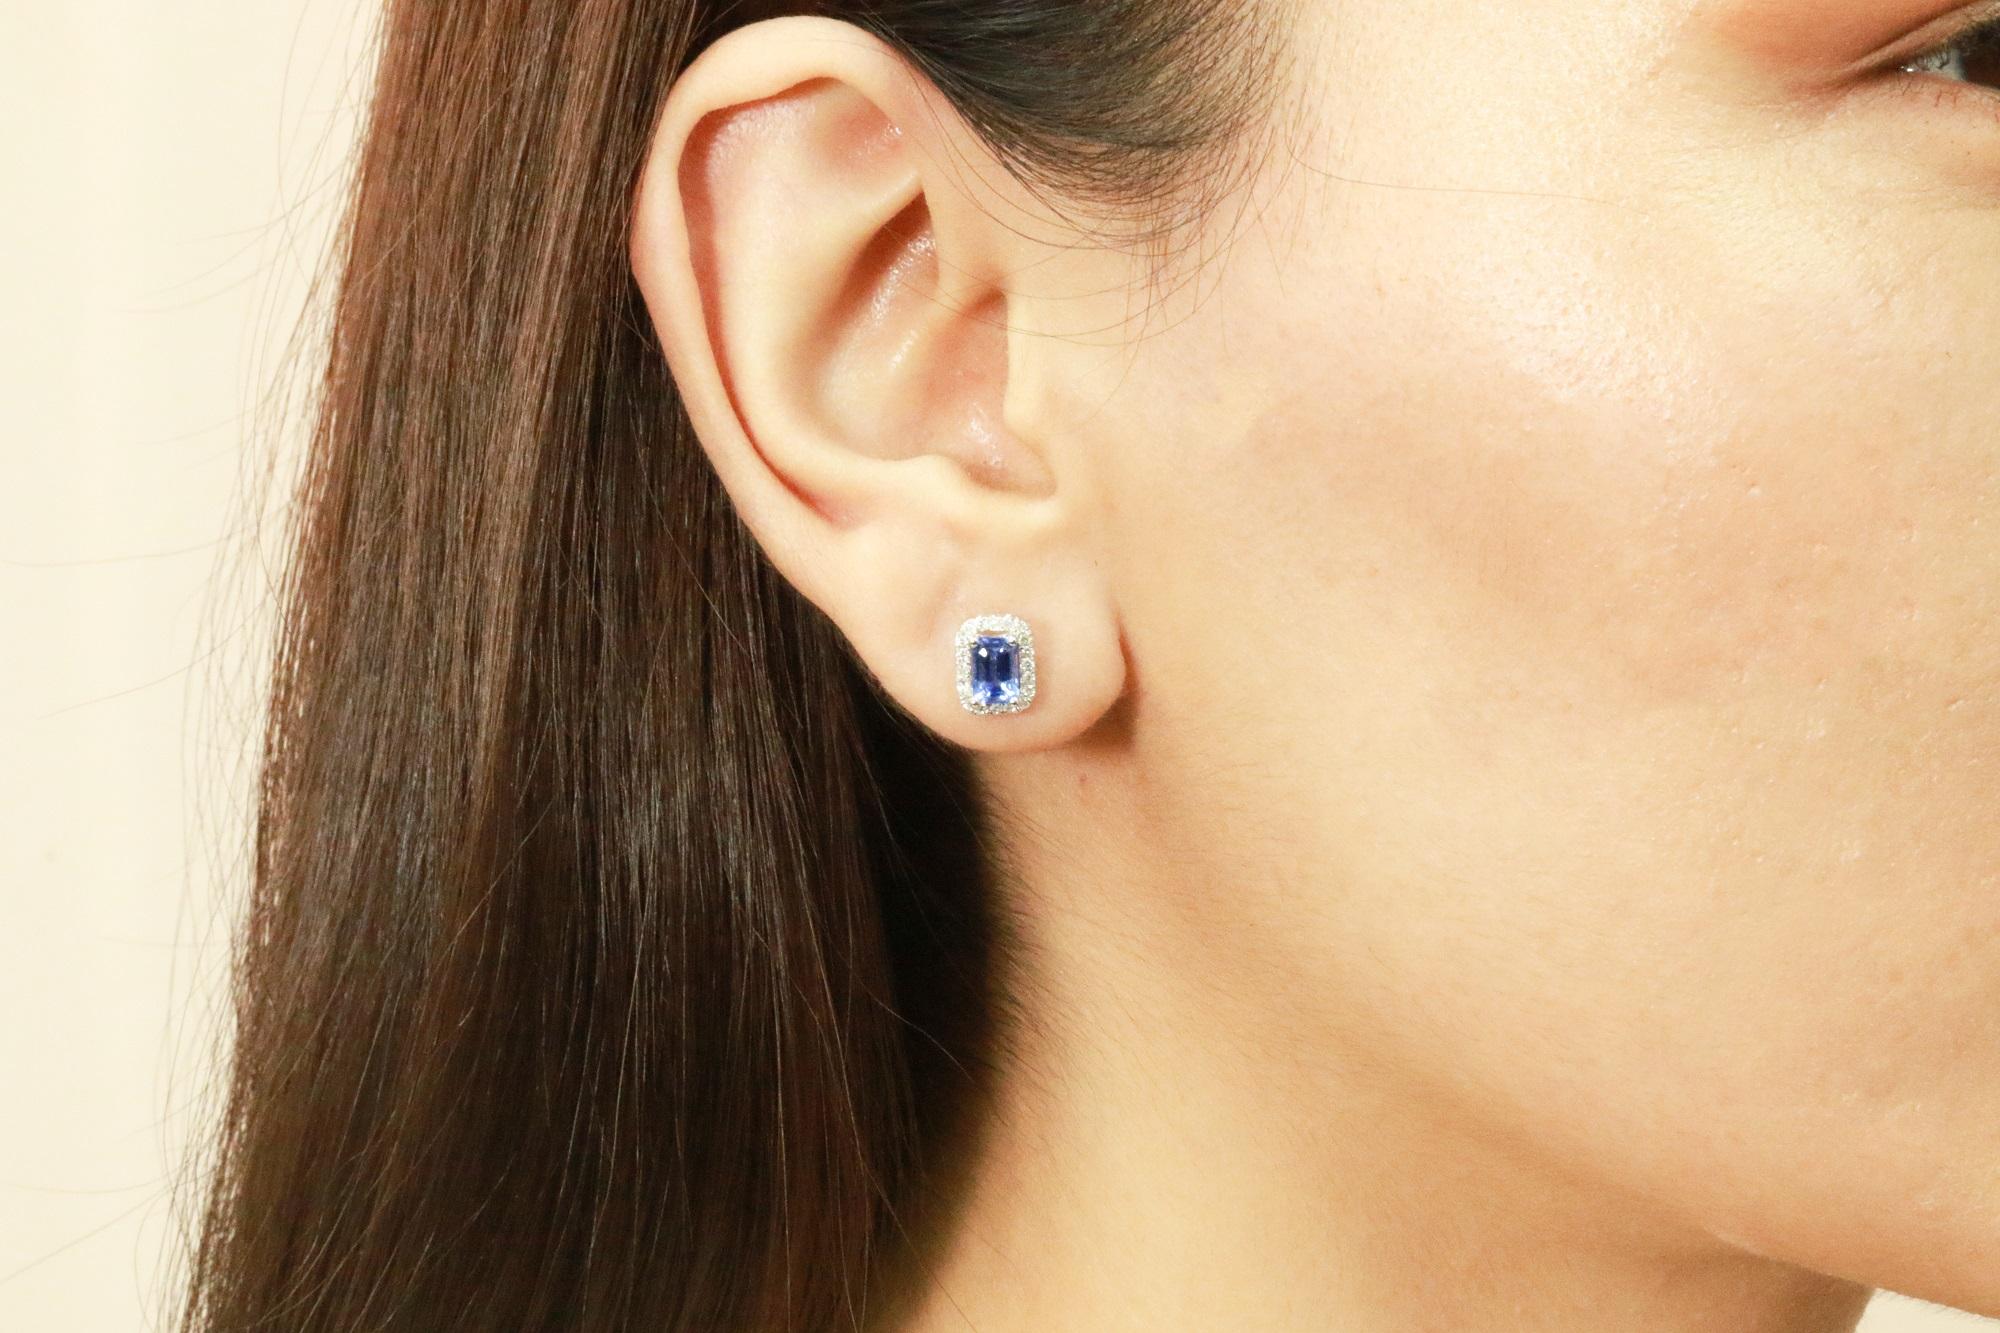 Stunning, timeless and classy eternity Unique Earring. Decorate yourself in luxury with this Gin & Grace Earring. The 14k White Gold jewelry boasts Emerald-Cut Prong Setting Genuine Tanzanite (2 pcs) 1.28 Carat along with Round-Cut Natural white